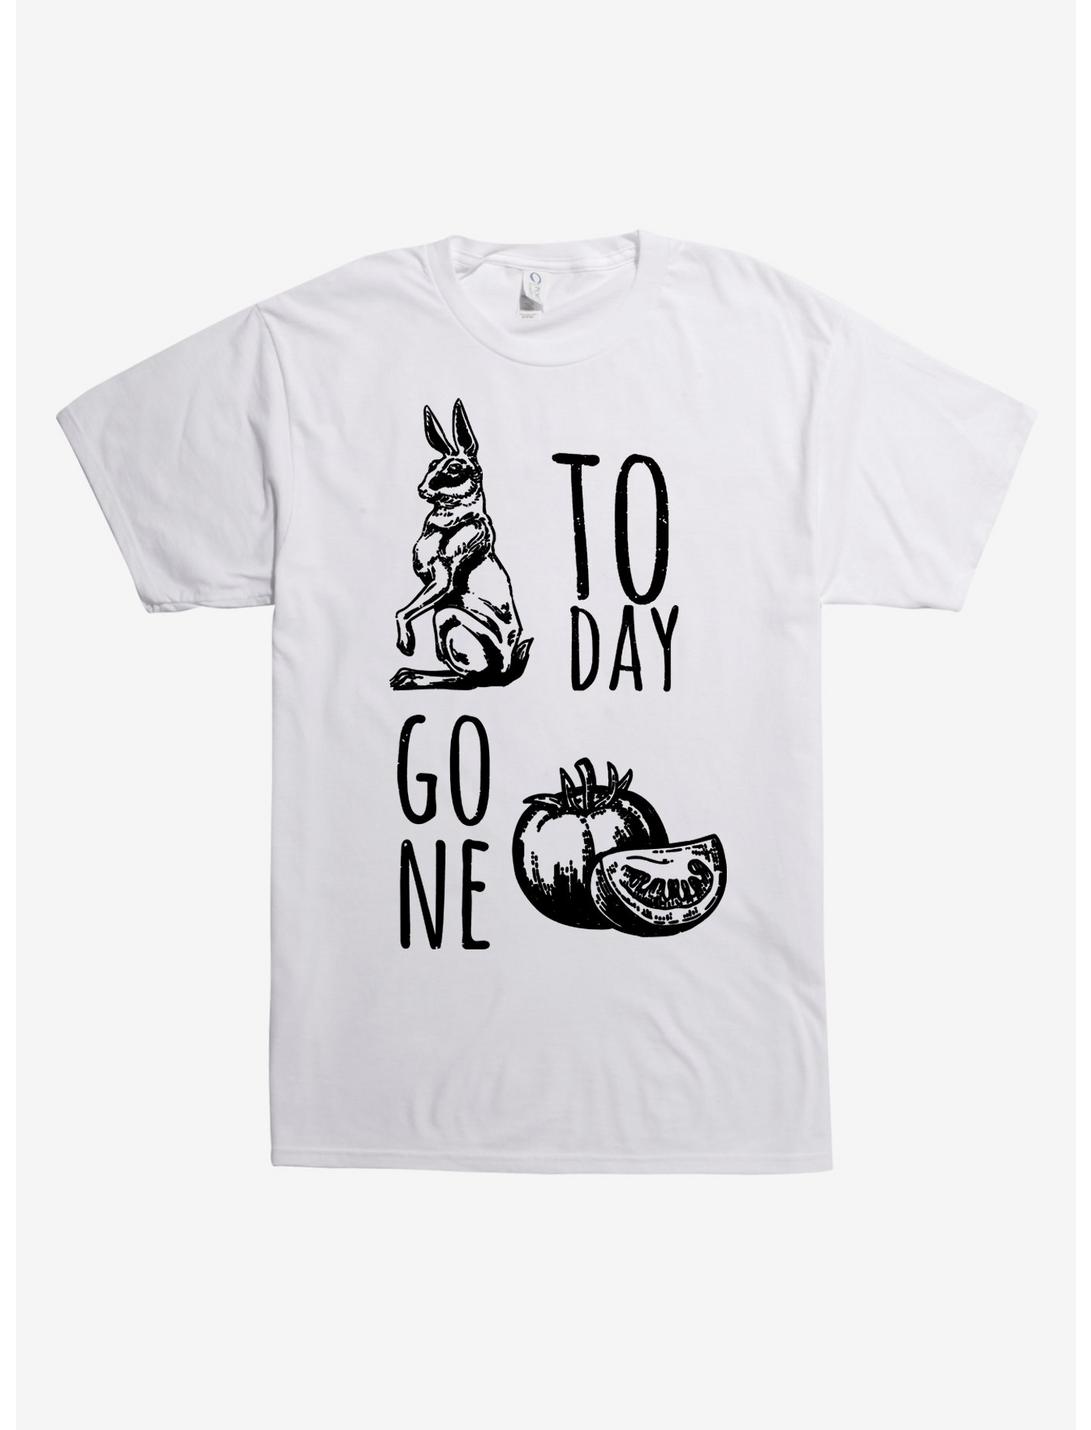 Hare Today Gone Tomato T-Shirt, WHITE, hi-res